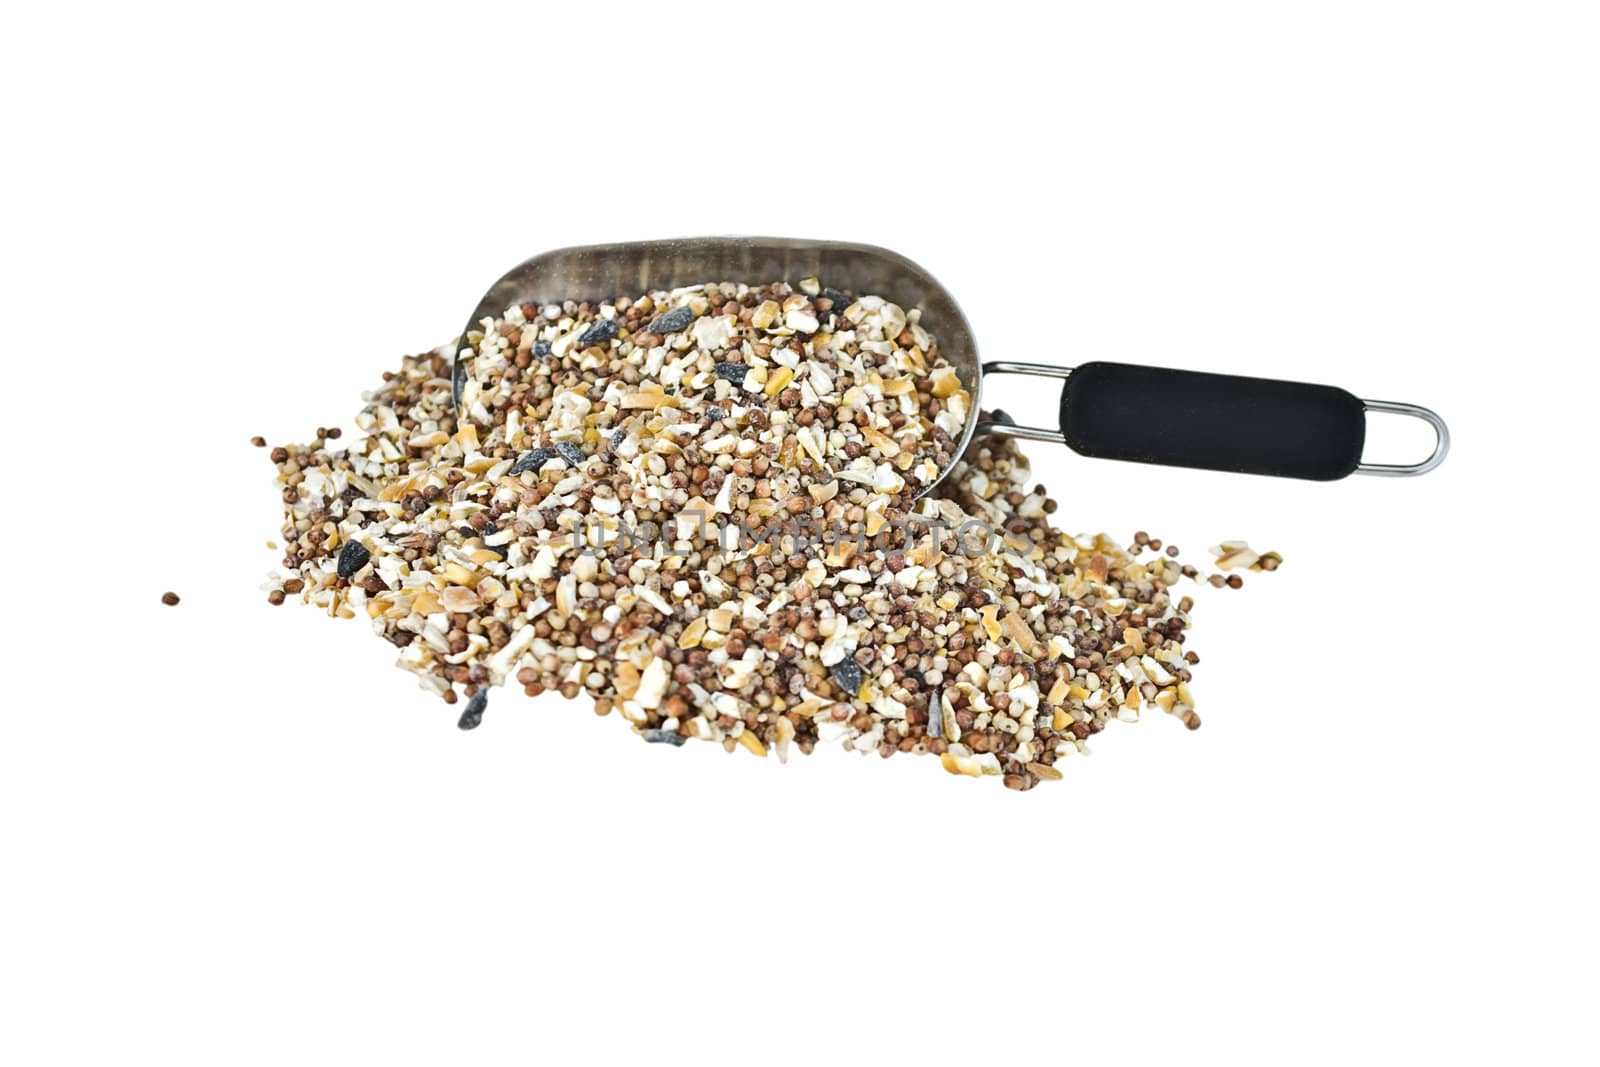 scoop of wild bird seed isolated on a white background

